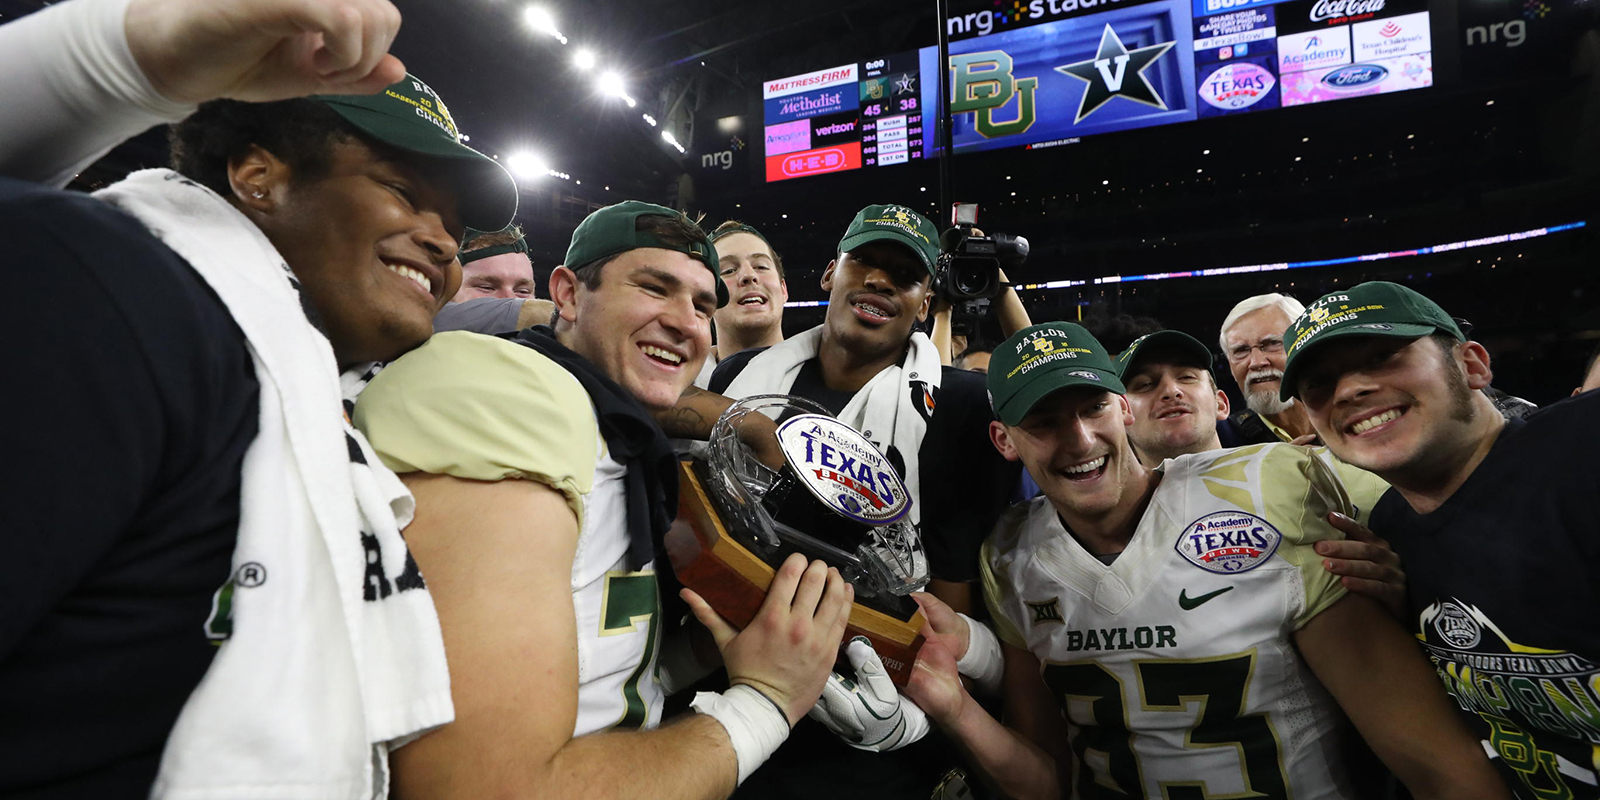 Baylor football players with Texas Bowl trophy